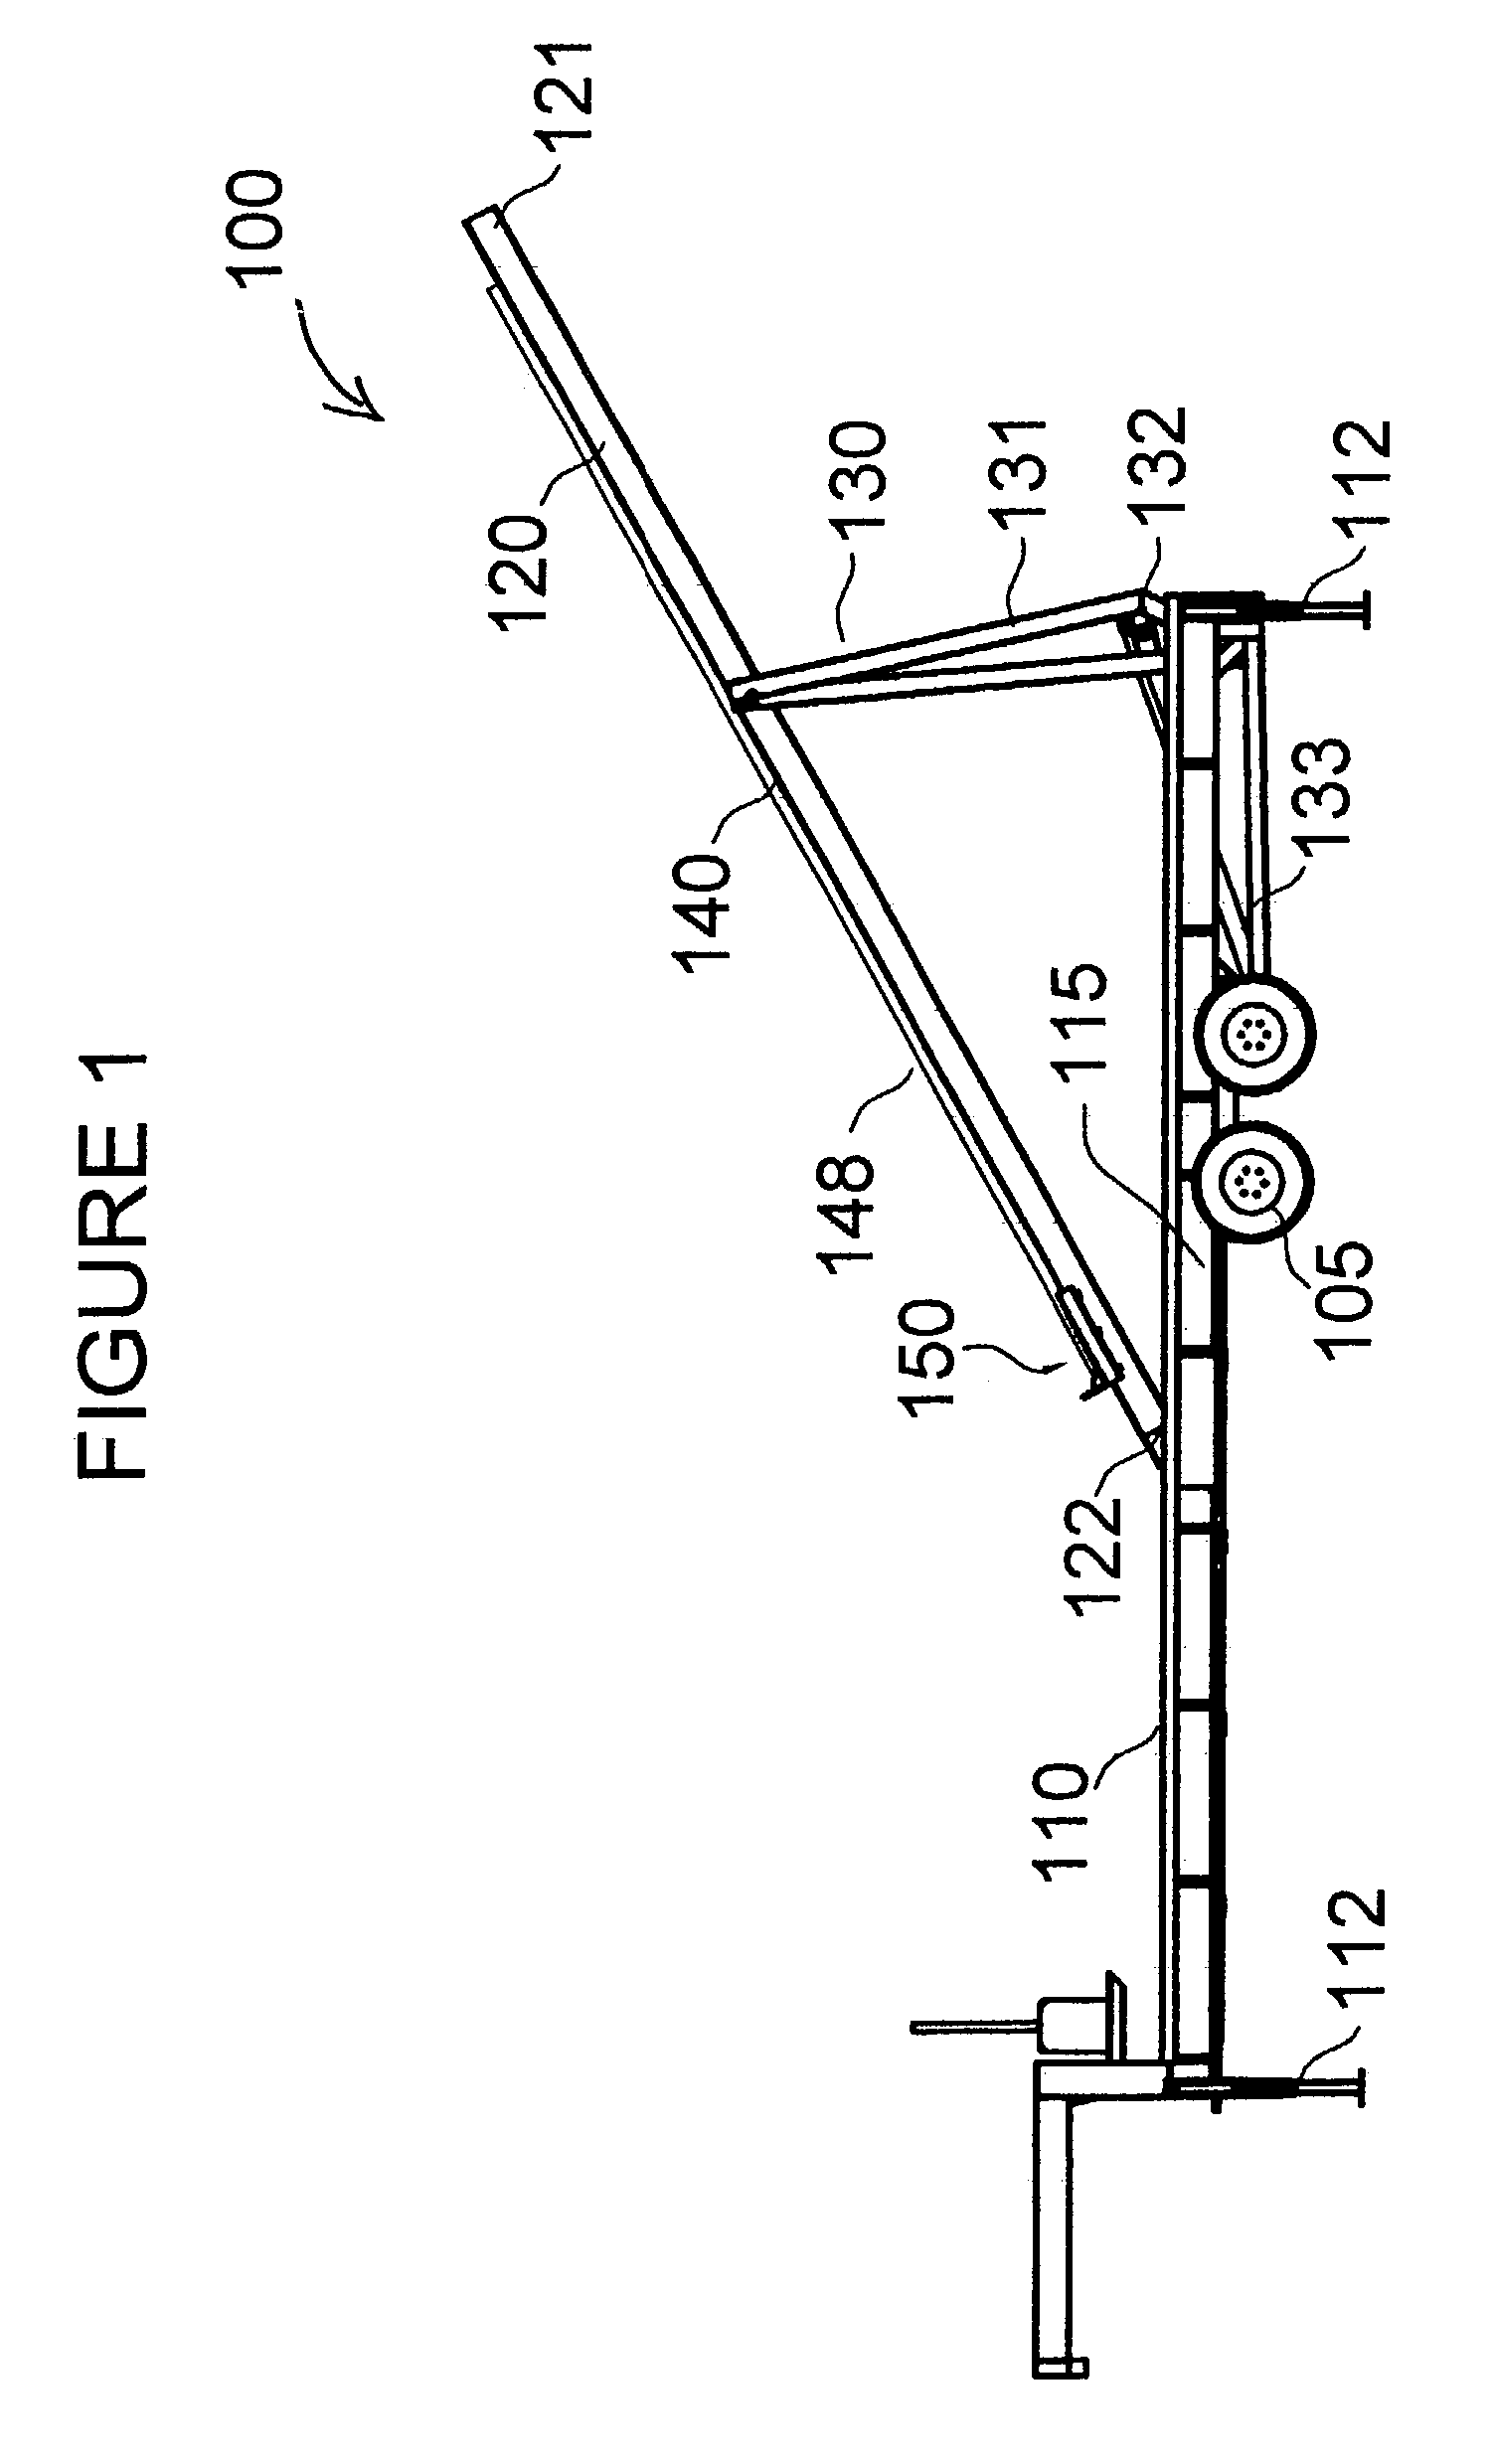 Pipe handling apparatus for presenting sections of pipe to a derrick work floor having a high-speed carriage assembly